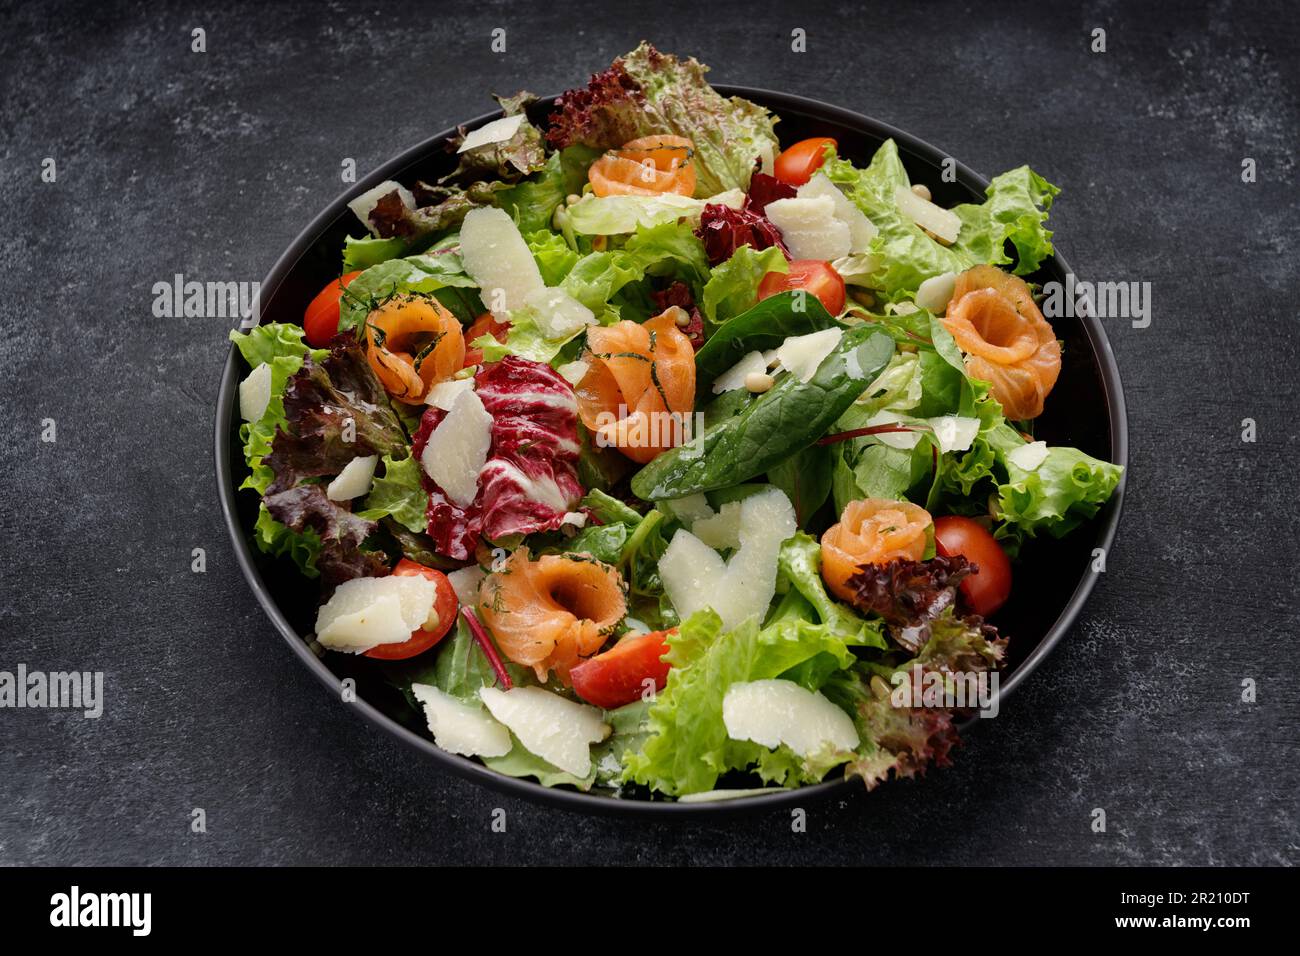 https://c8.alamy.com/comp/2R210DT/deliciously-crafted-salad-with-salmon-parmesan-tomatoes-and-mixed-greens-2R210DT.jpg